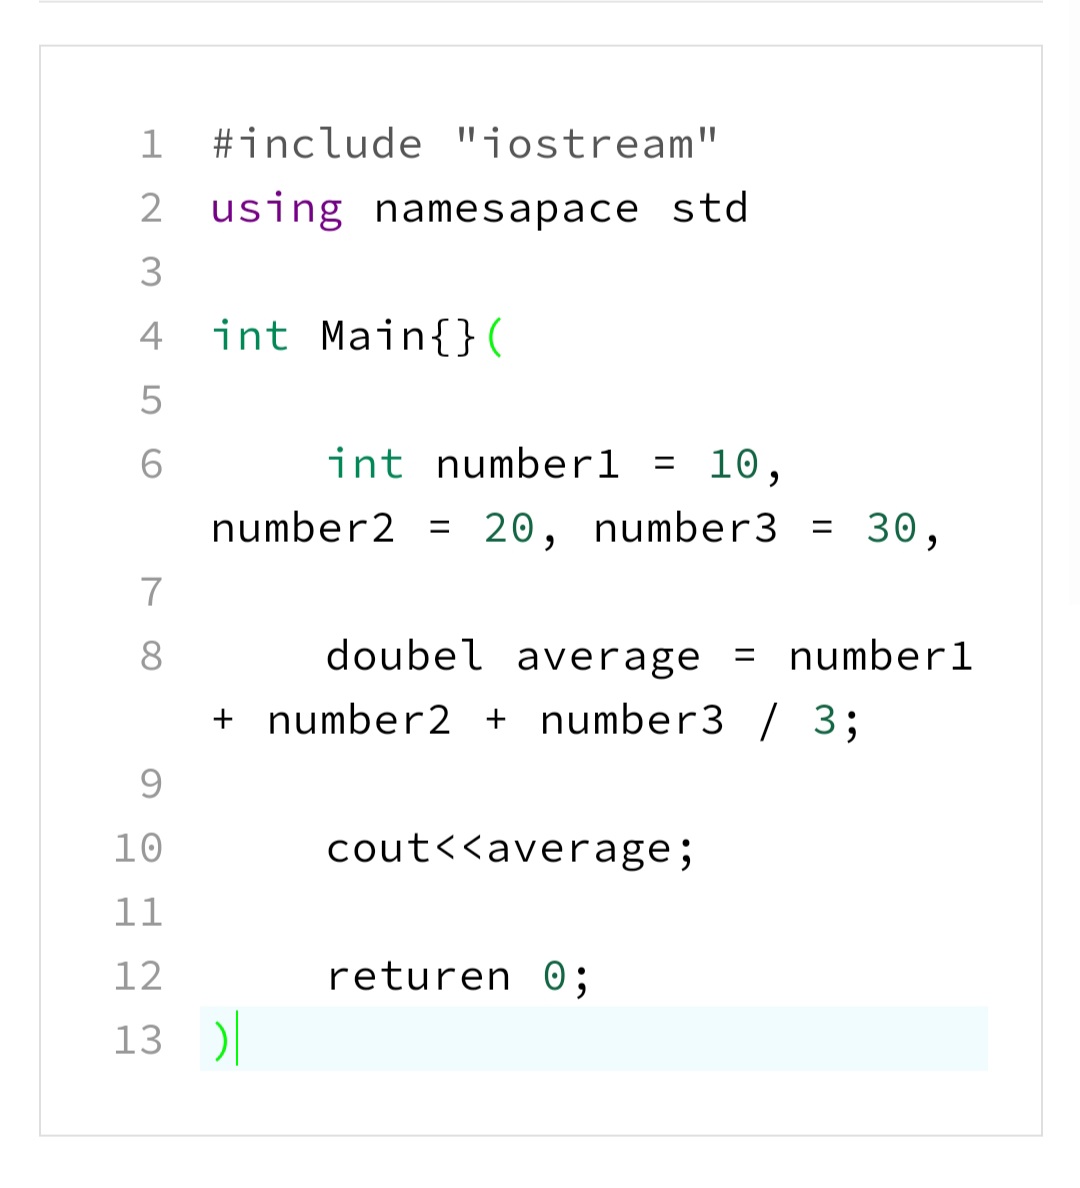 1 #include "jostream"
2 using namesapace std
3
4
int Main{}(
6
int numberl = 10,
number2 = 20, number3 = 30,
%3D
7
8
doubel average
= numberl
%3D
+ number2 + number3 / 3;
9.
10
cout<<average;
11
12
returen 0;
13 )|
